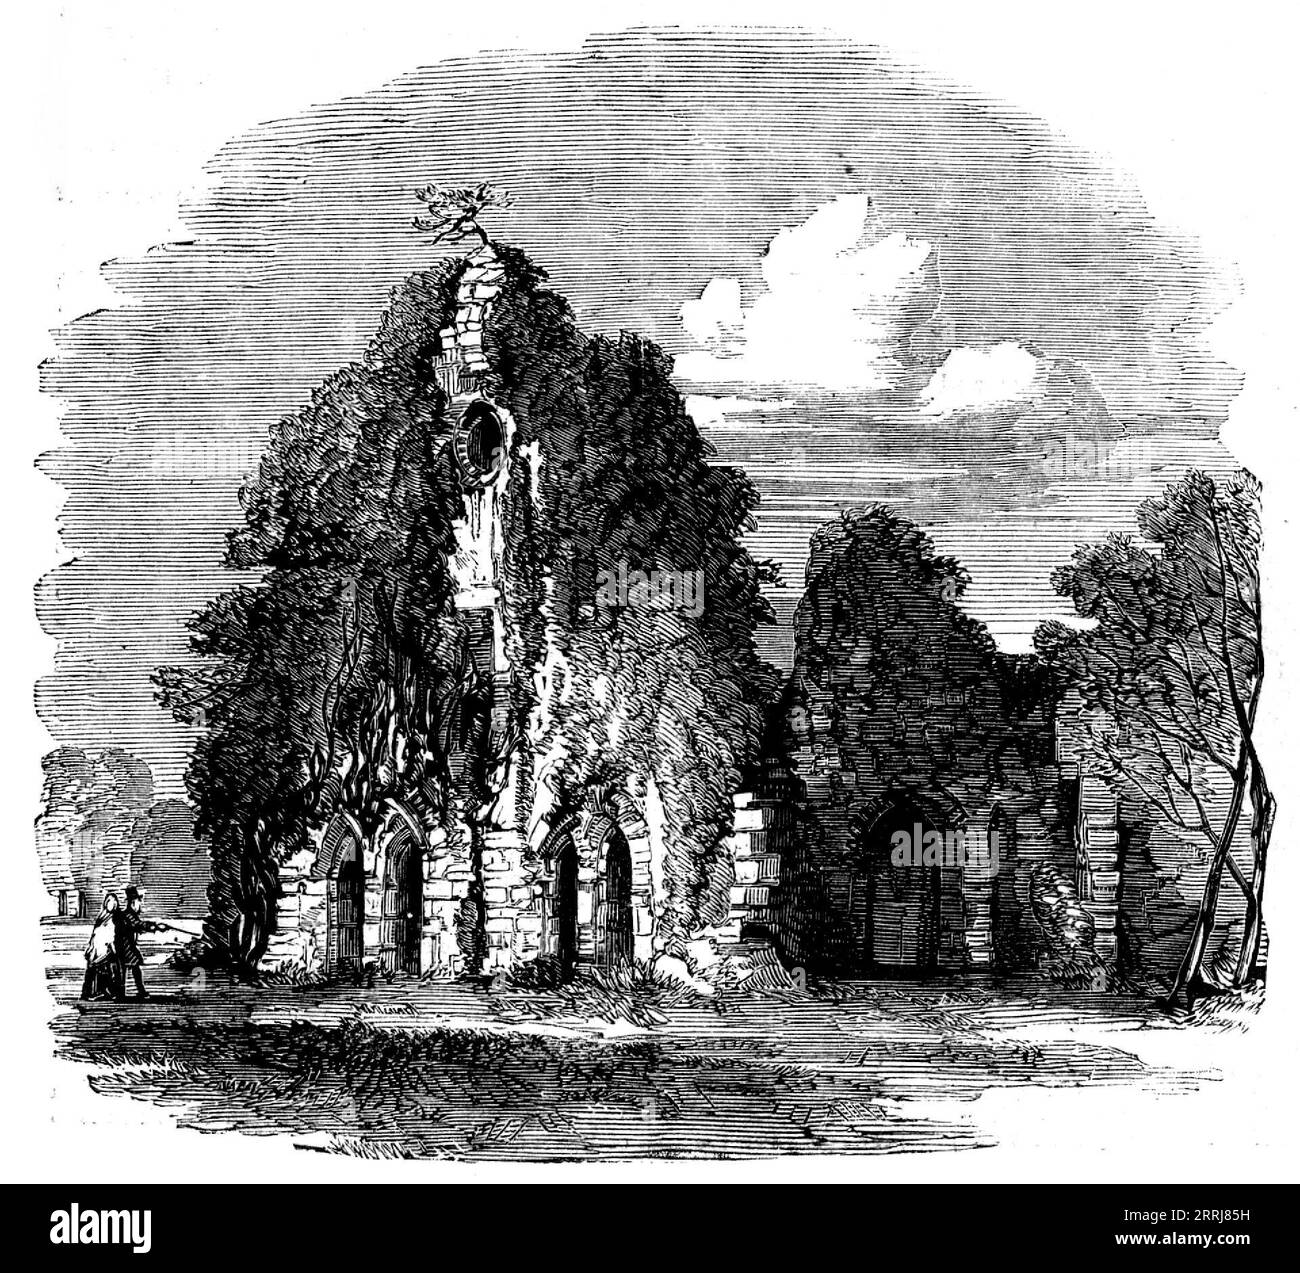 Waverley Abbey, Surrey - from a photograph by Mr. Liddiard, of Farnham, 1858.'...the ruins of Waverley Abbey...stand on a broad green meadow, round which the River Wey, overlooked by low wooded hills, winds on three sides...Waverley was the first house of the White Monks, the Cistercian &quot;Grex albus,&quot; founded in England, and was established in 1128...There can be no doubt but that it was in turning over [the] pages of Gale's &quot;Hist. Anglican Scriptores&quot; that the graceful name of the abbey approved itself to the ear of Sir Walter Scott. Little did the good monk think, as he la Stock Photo